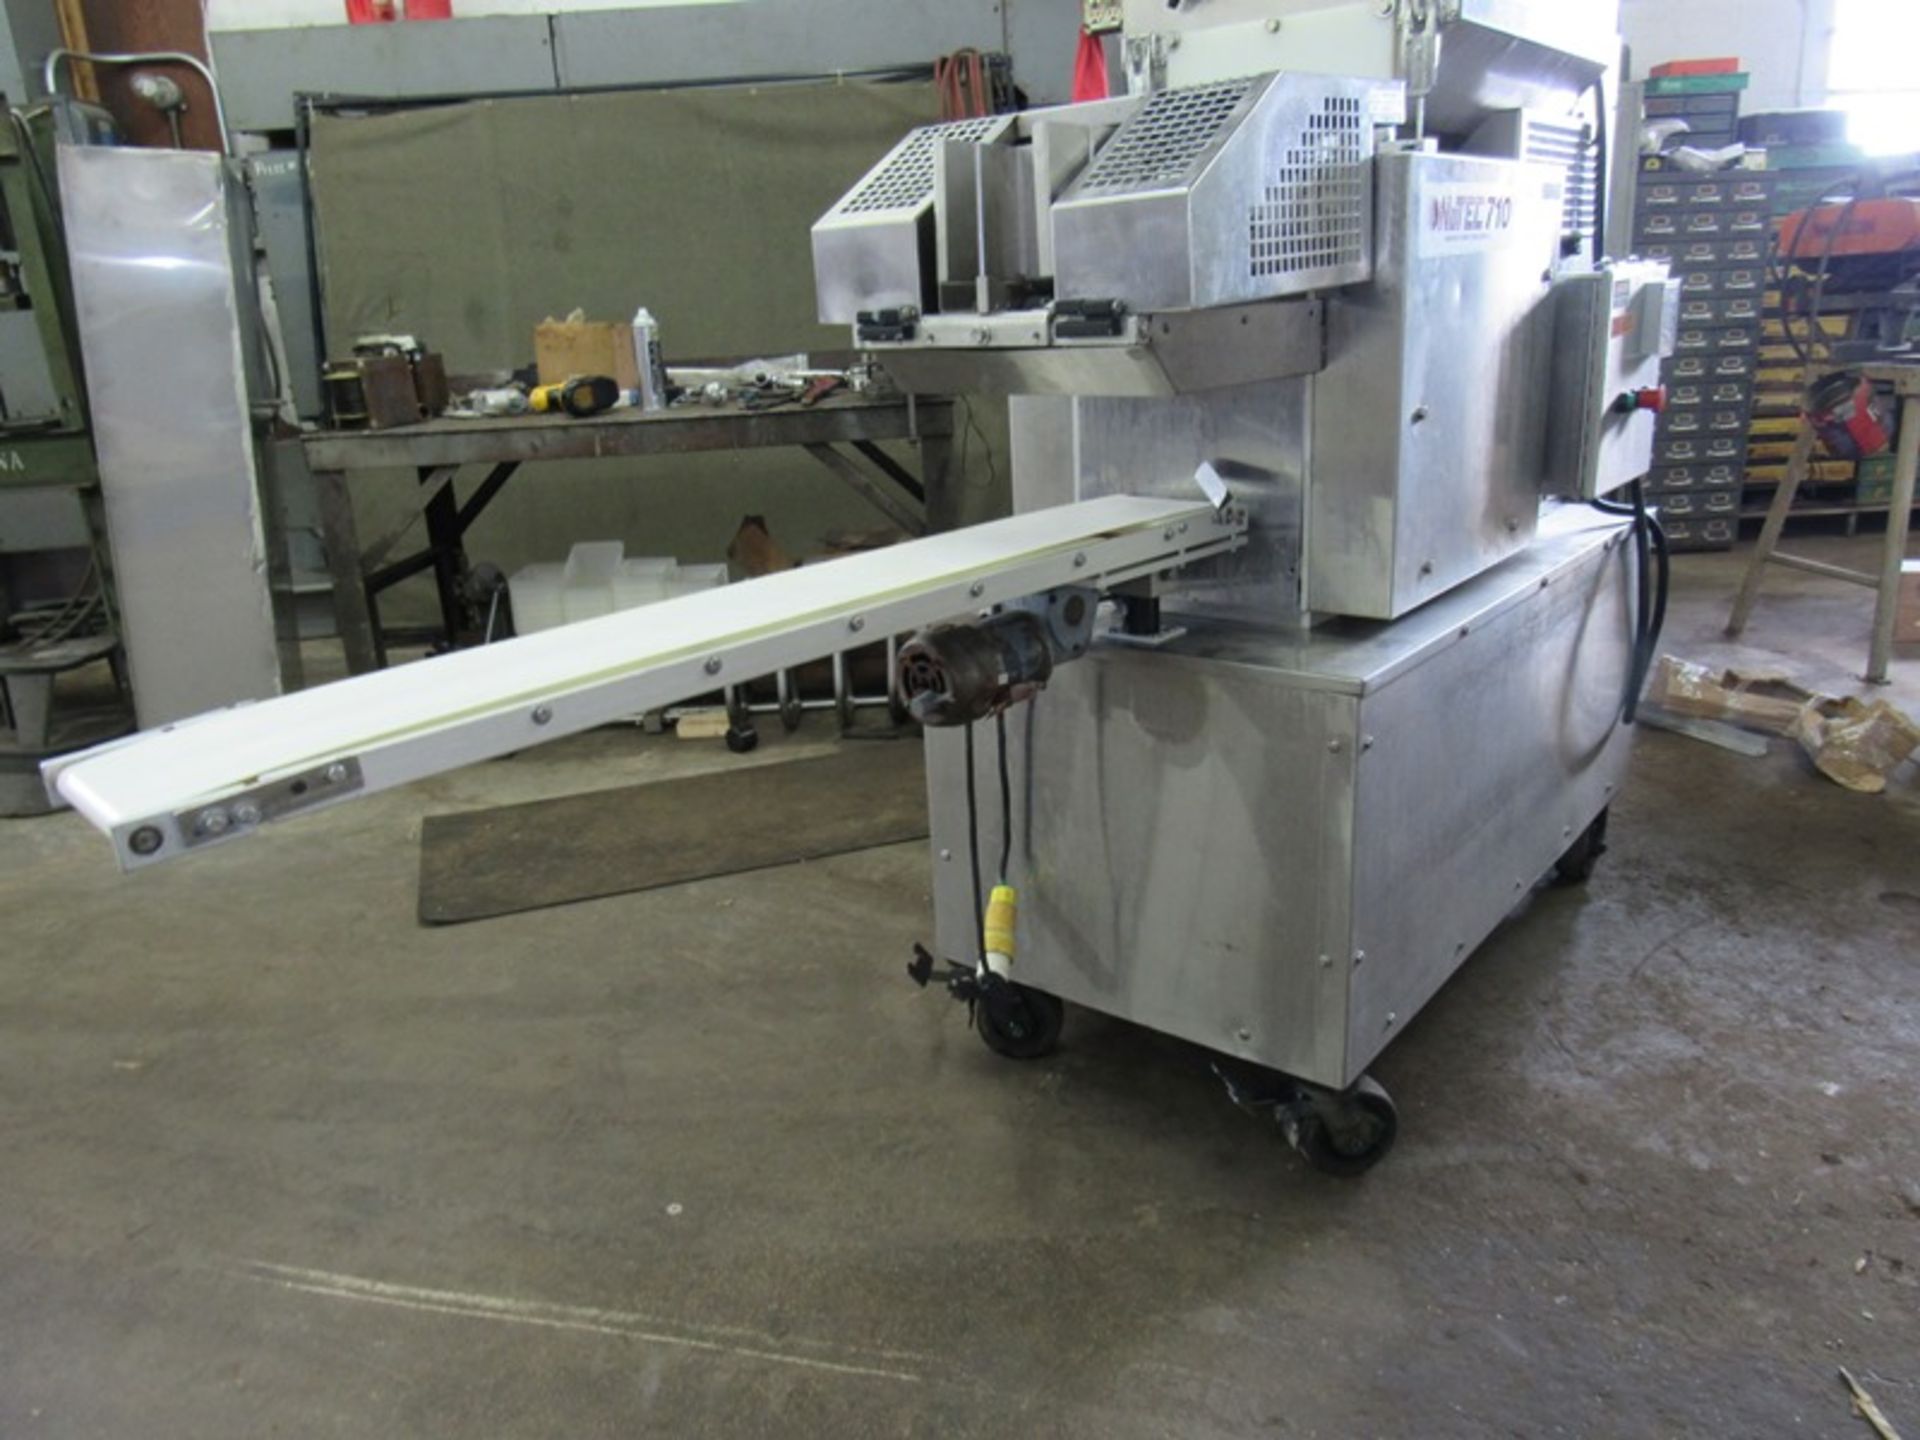 Nutec Mdl. 710 Portable Patty Forming Machine with paper feed setup with 4 1/2" diameter X 3/8" - Image 2 of 10